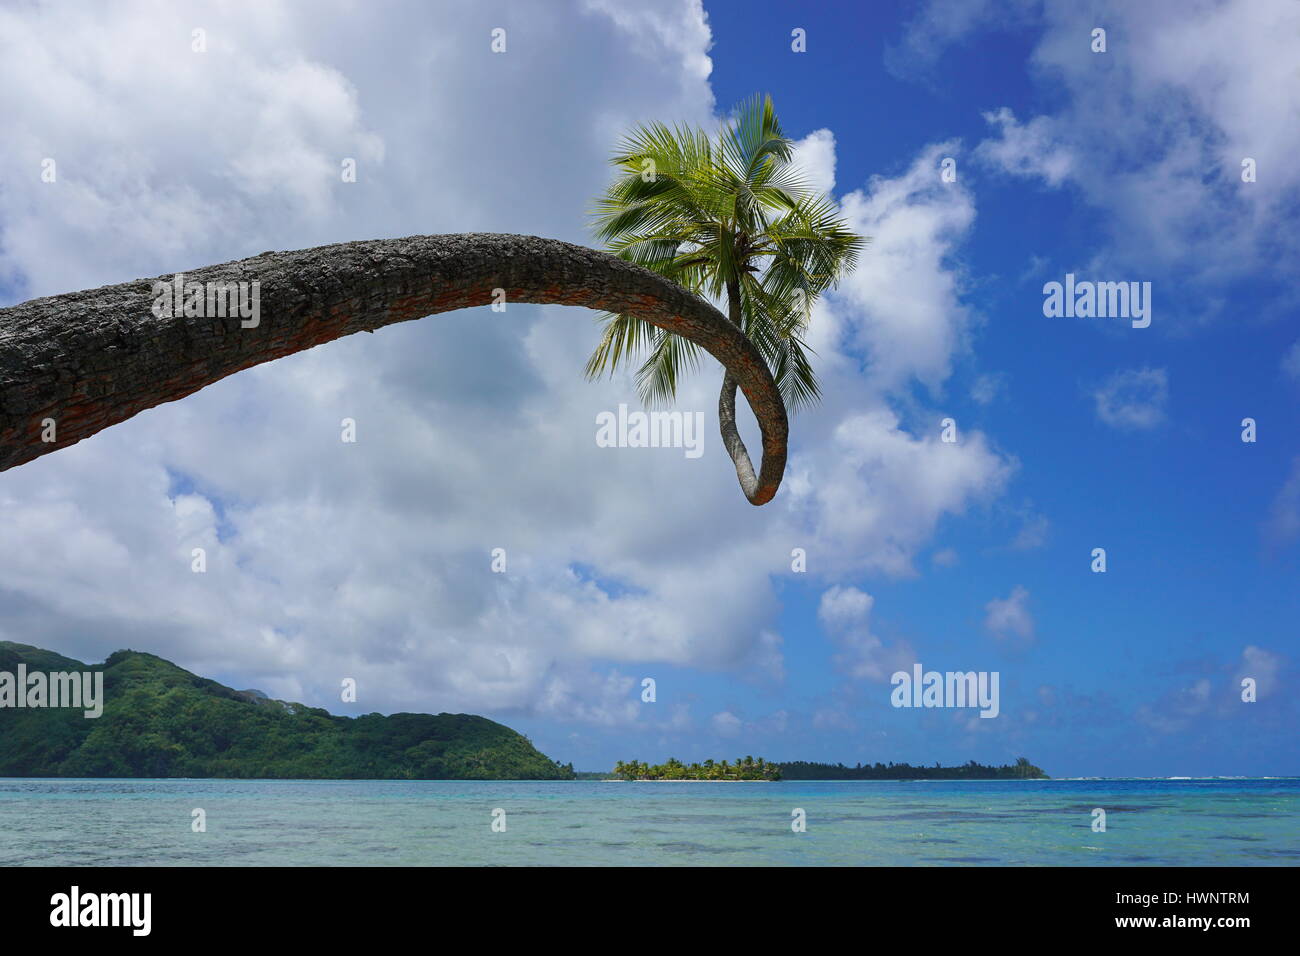 Twisted coconut palm tree leaning over the sea, Huahine island, Pacific ocean, French Polynesia, Oceania Stock Photo